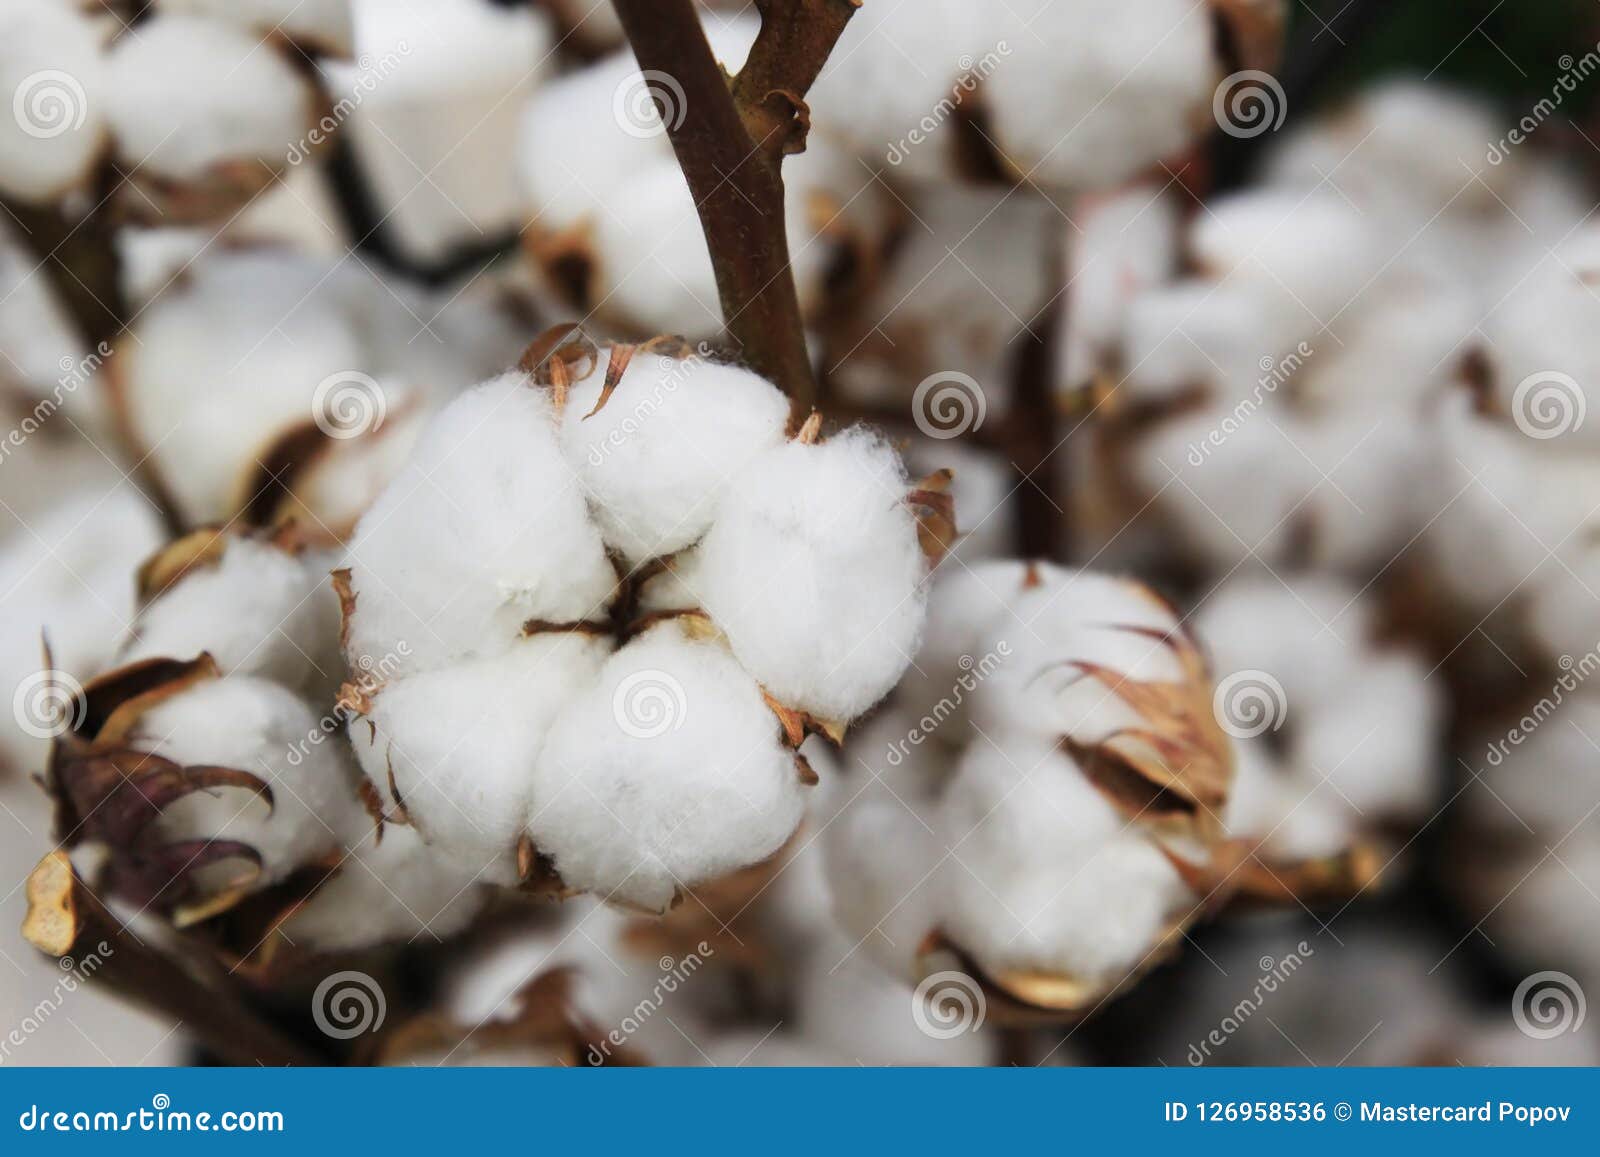 boxes of cotton on bushes